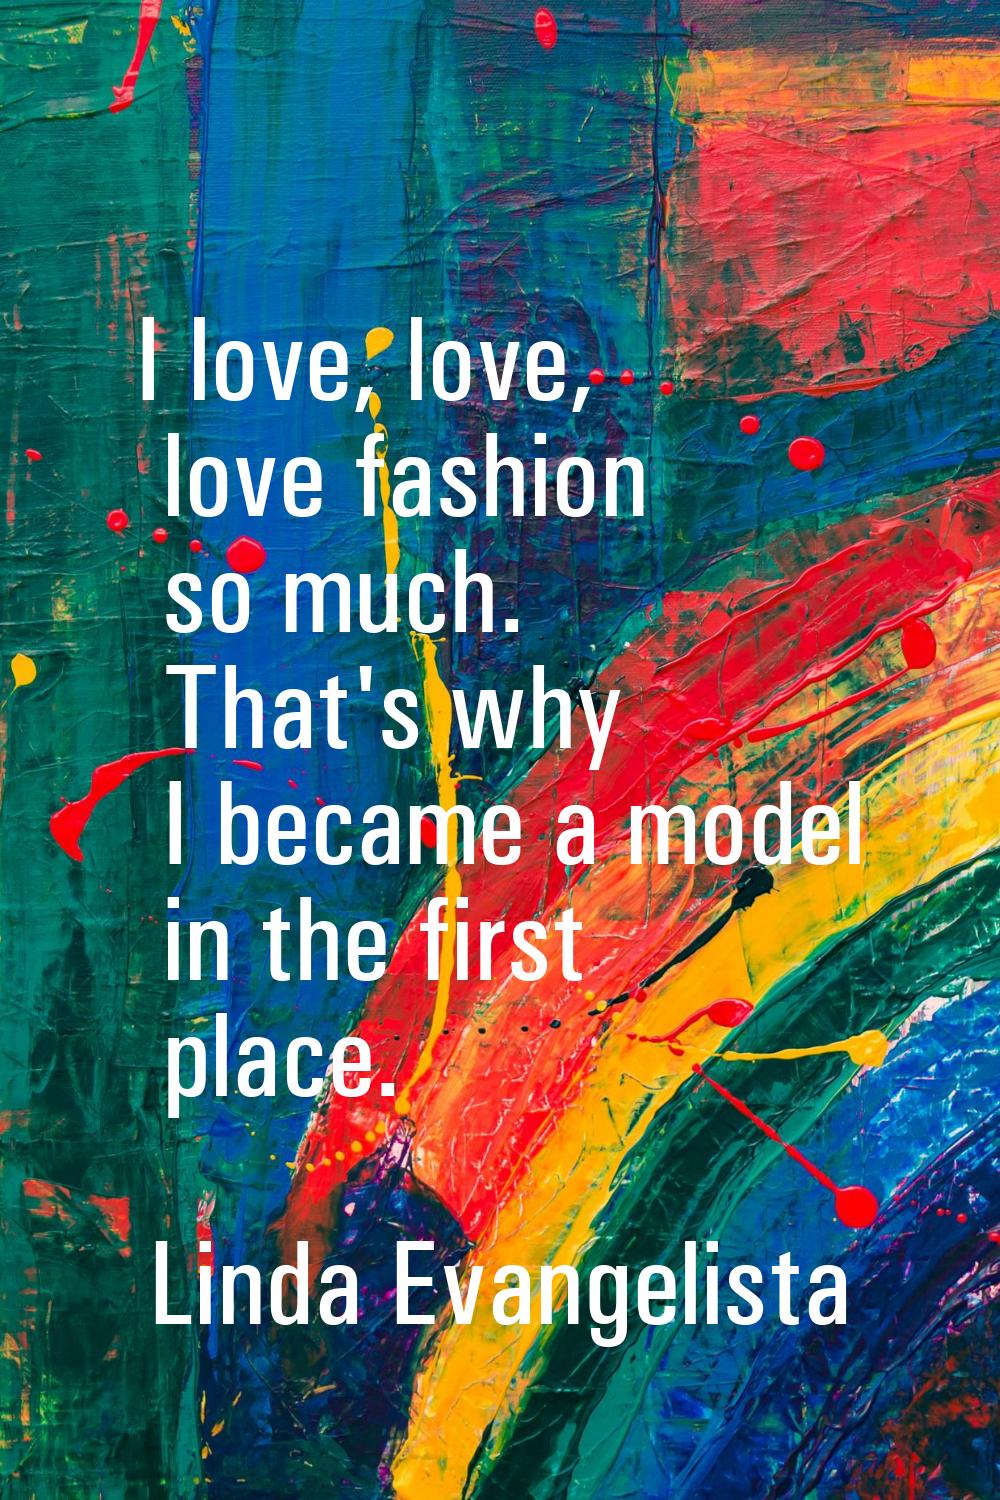 I love, love, love fashion so much. That's why I became a model in the first place.